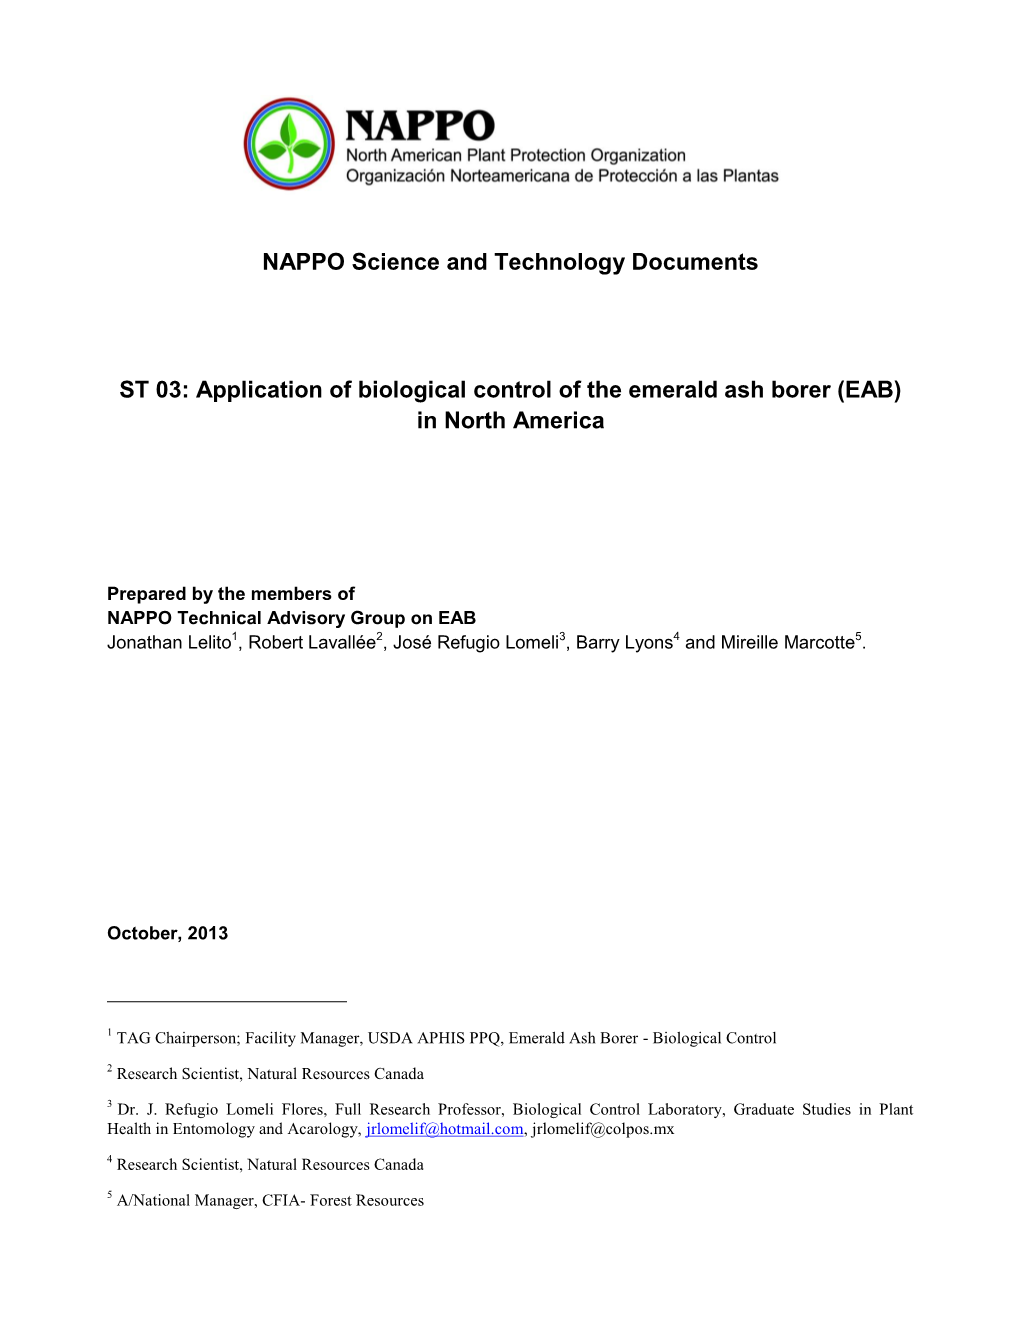 Application of Biological Control of the Emerald Ash Borer (EAB) in North America